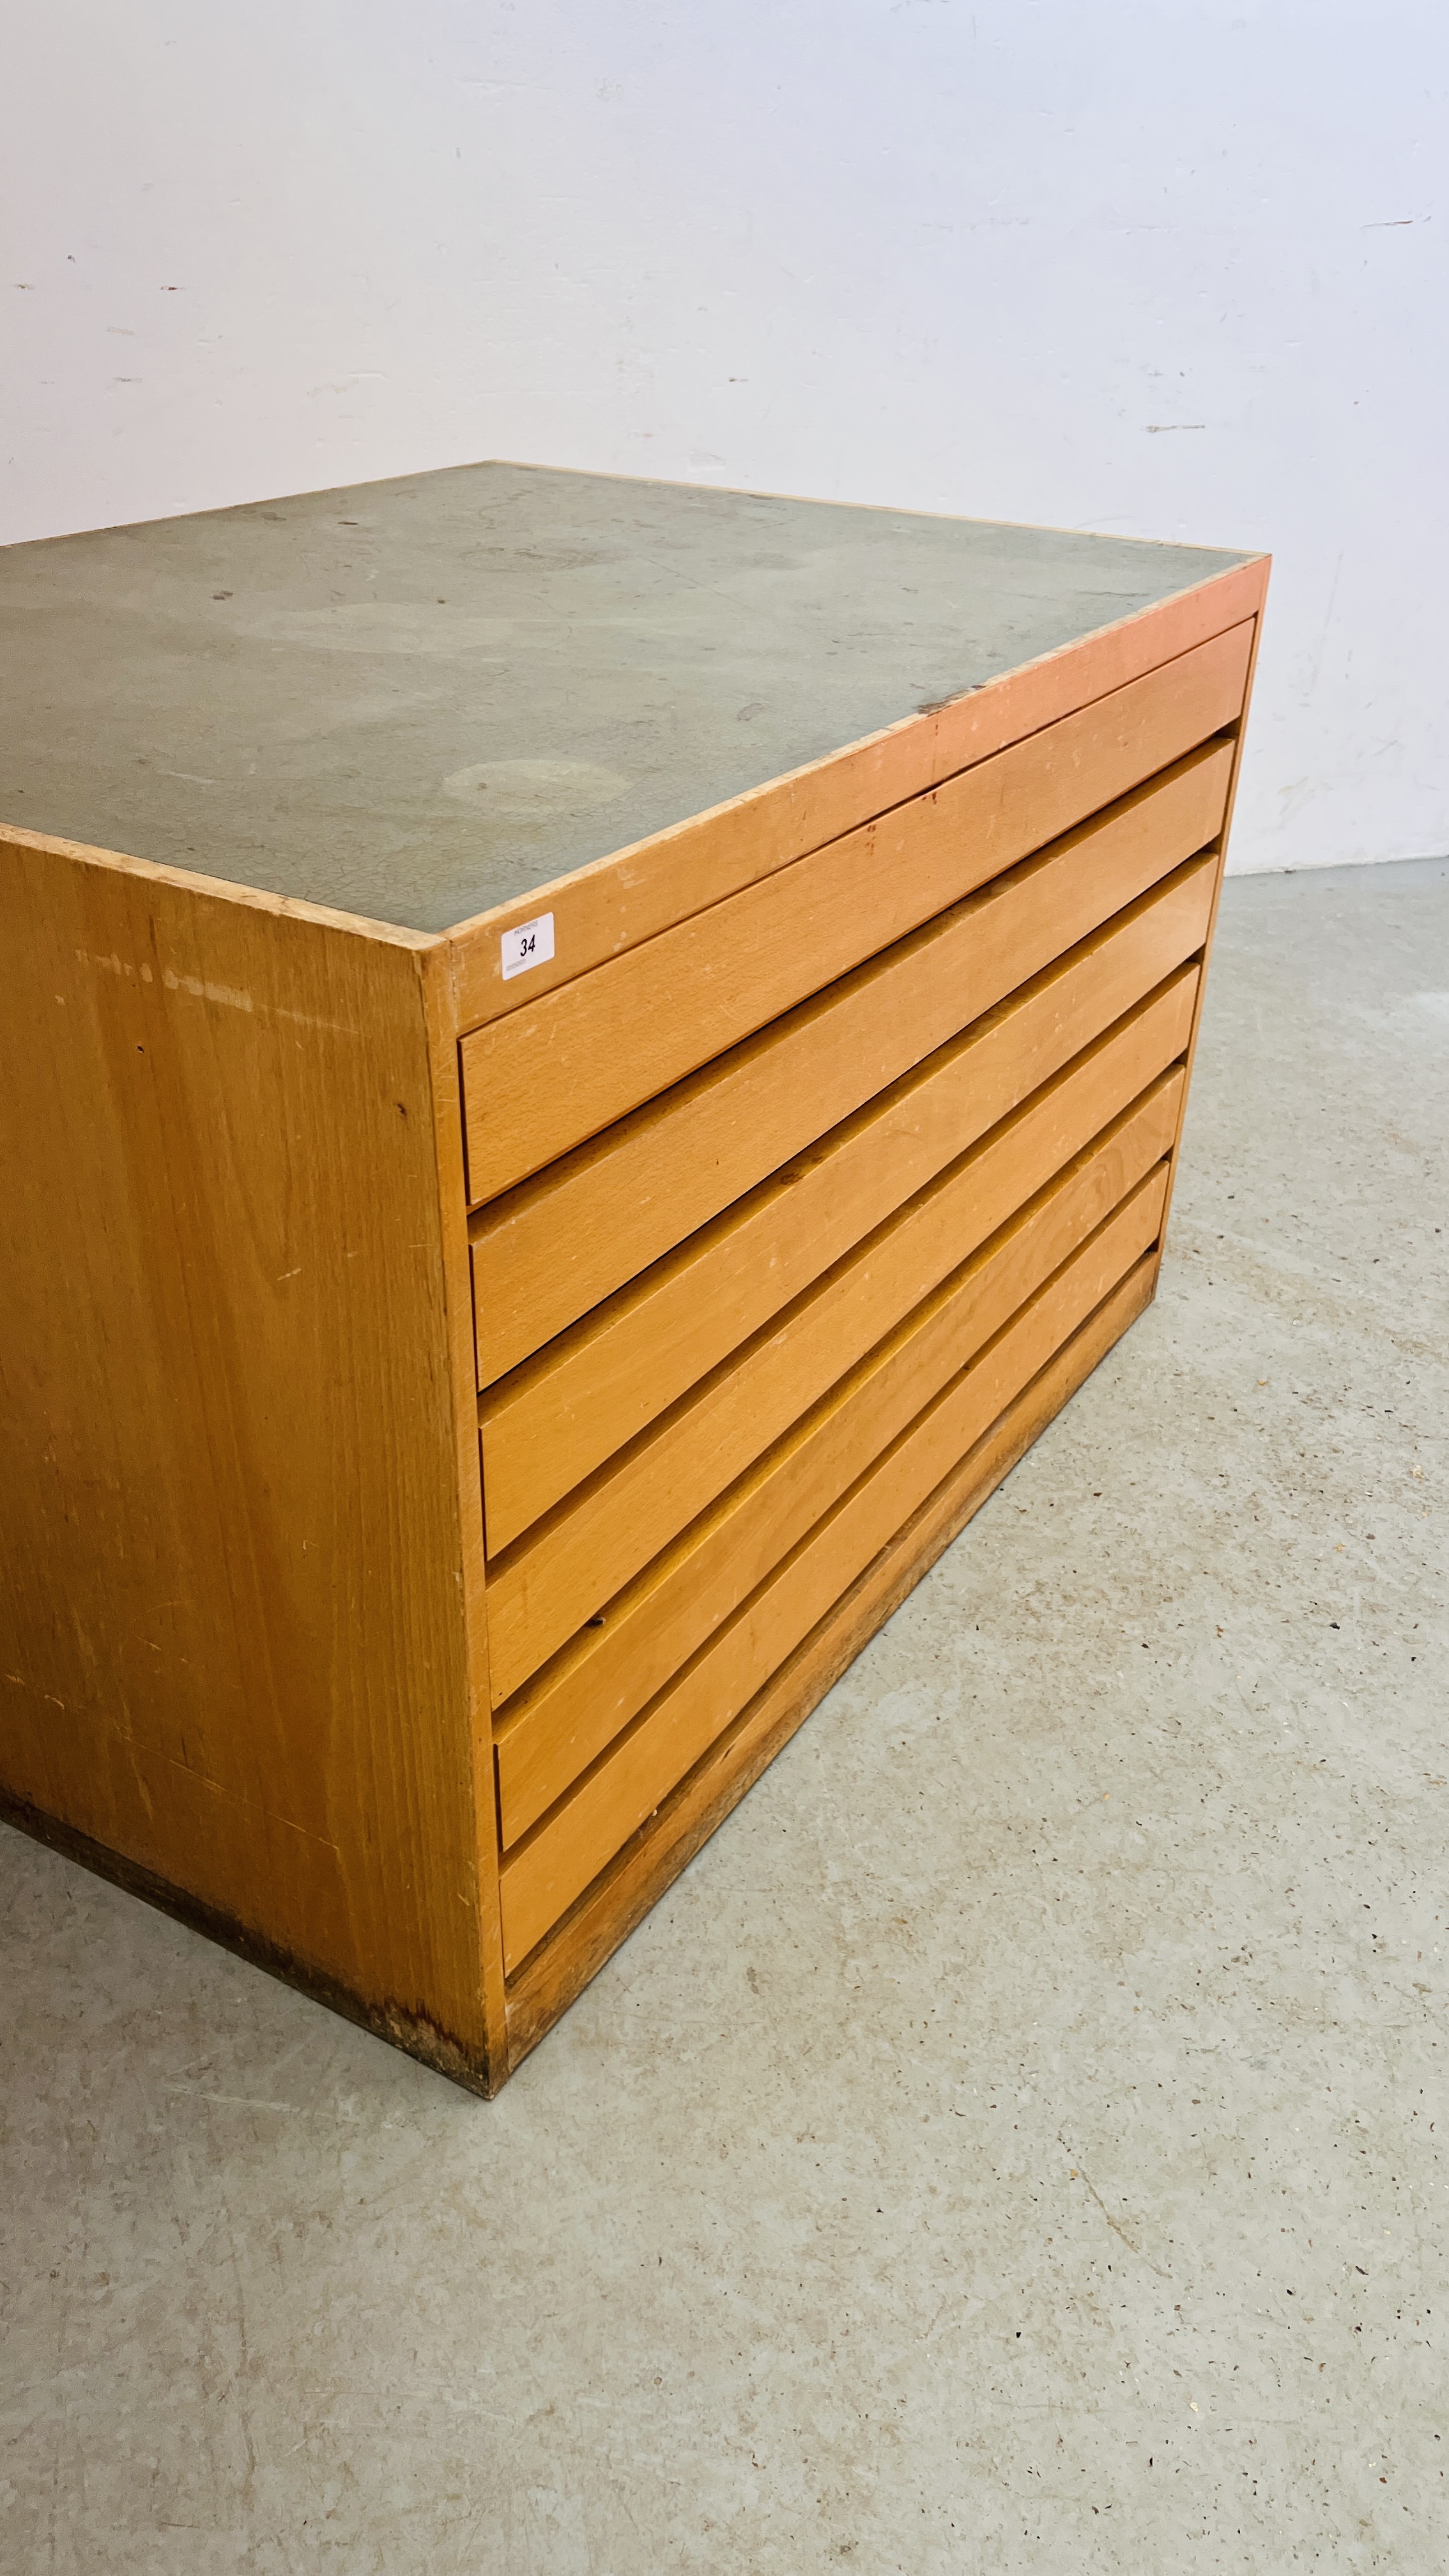 A BEECH WOOD PLAN CHEST, - Image 6 of 11